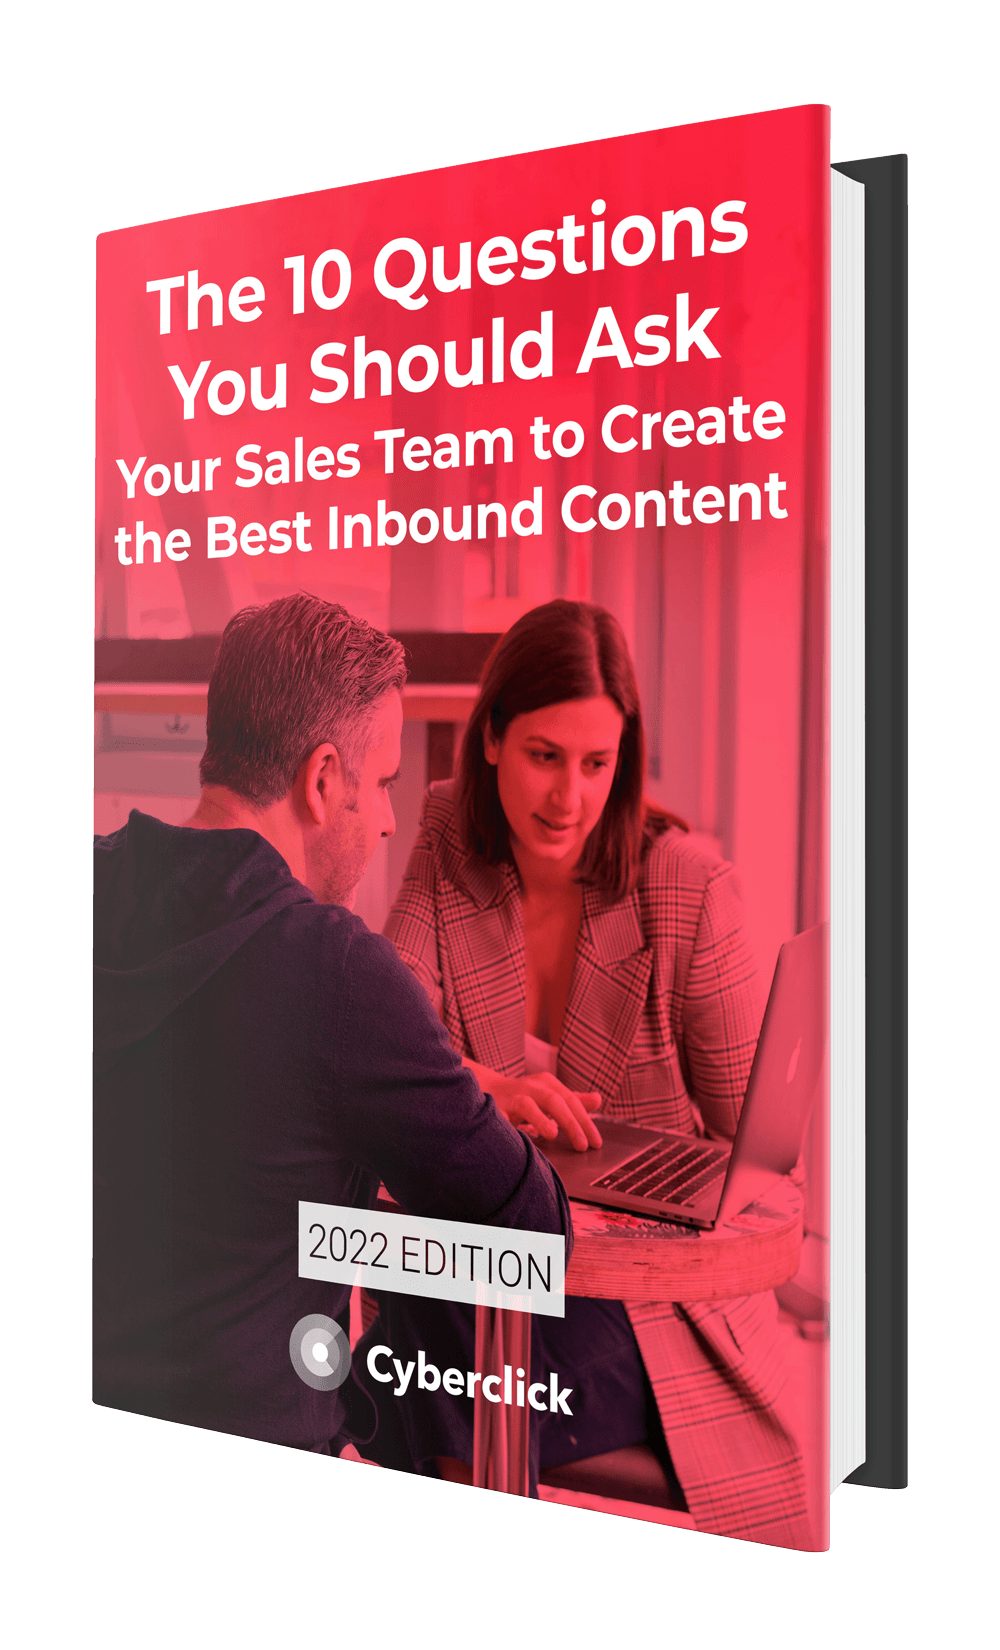 10 Questions You Should Ask Your Sales Team to Create the Best Inbound Content